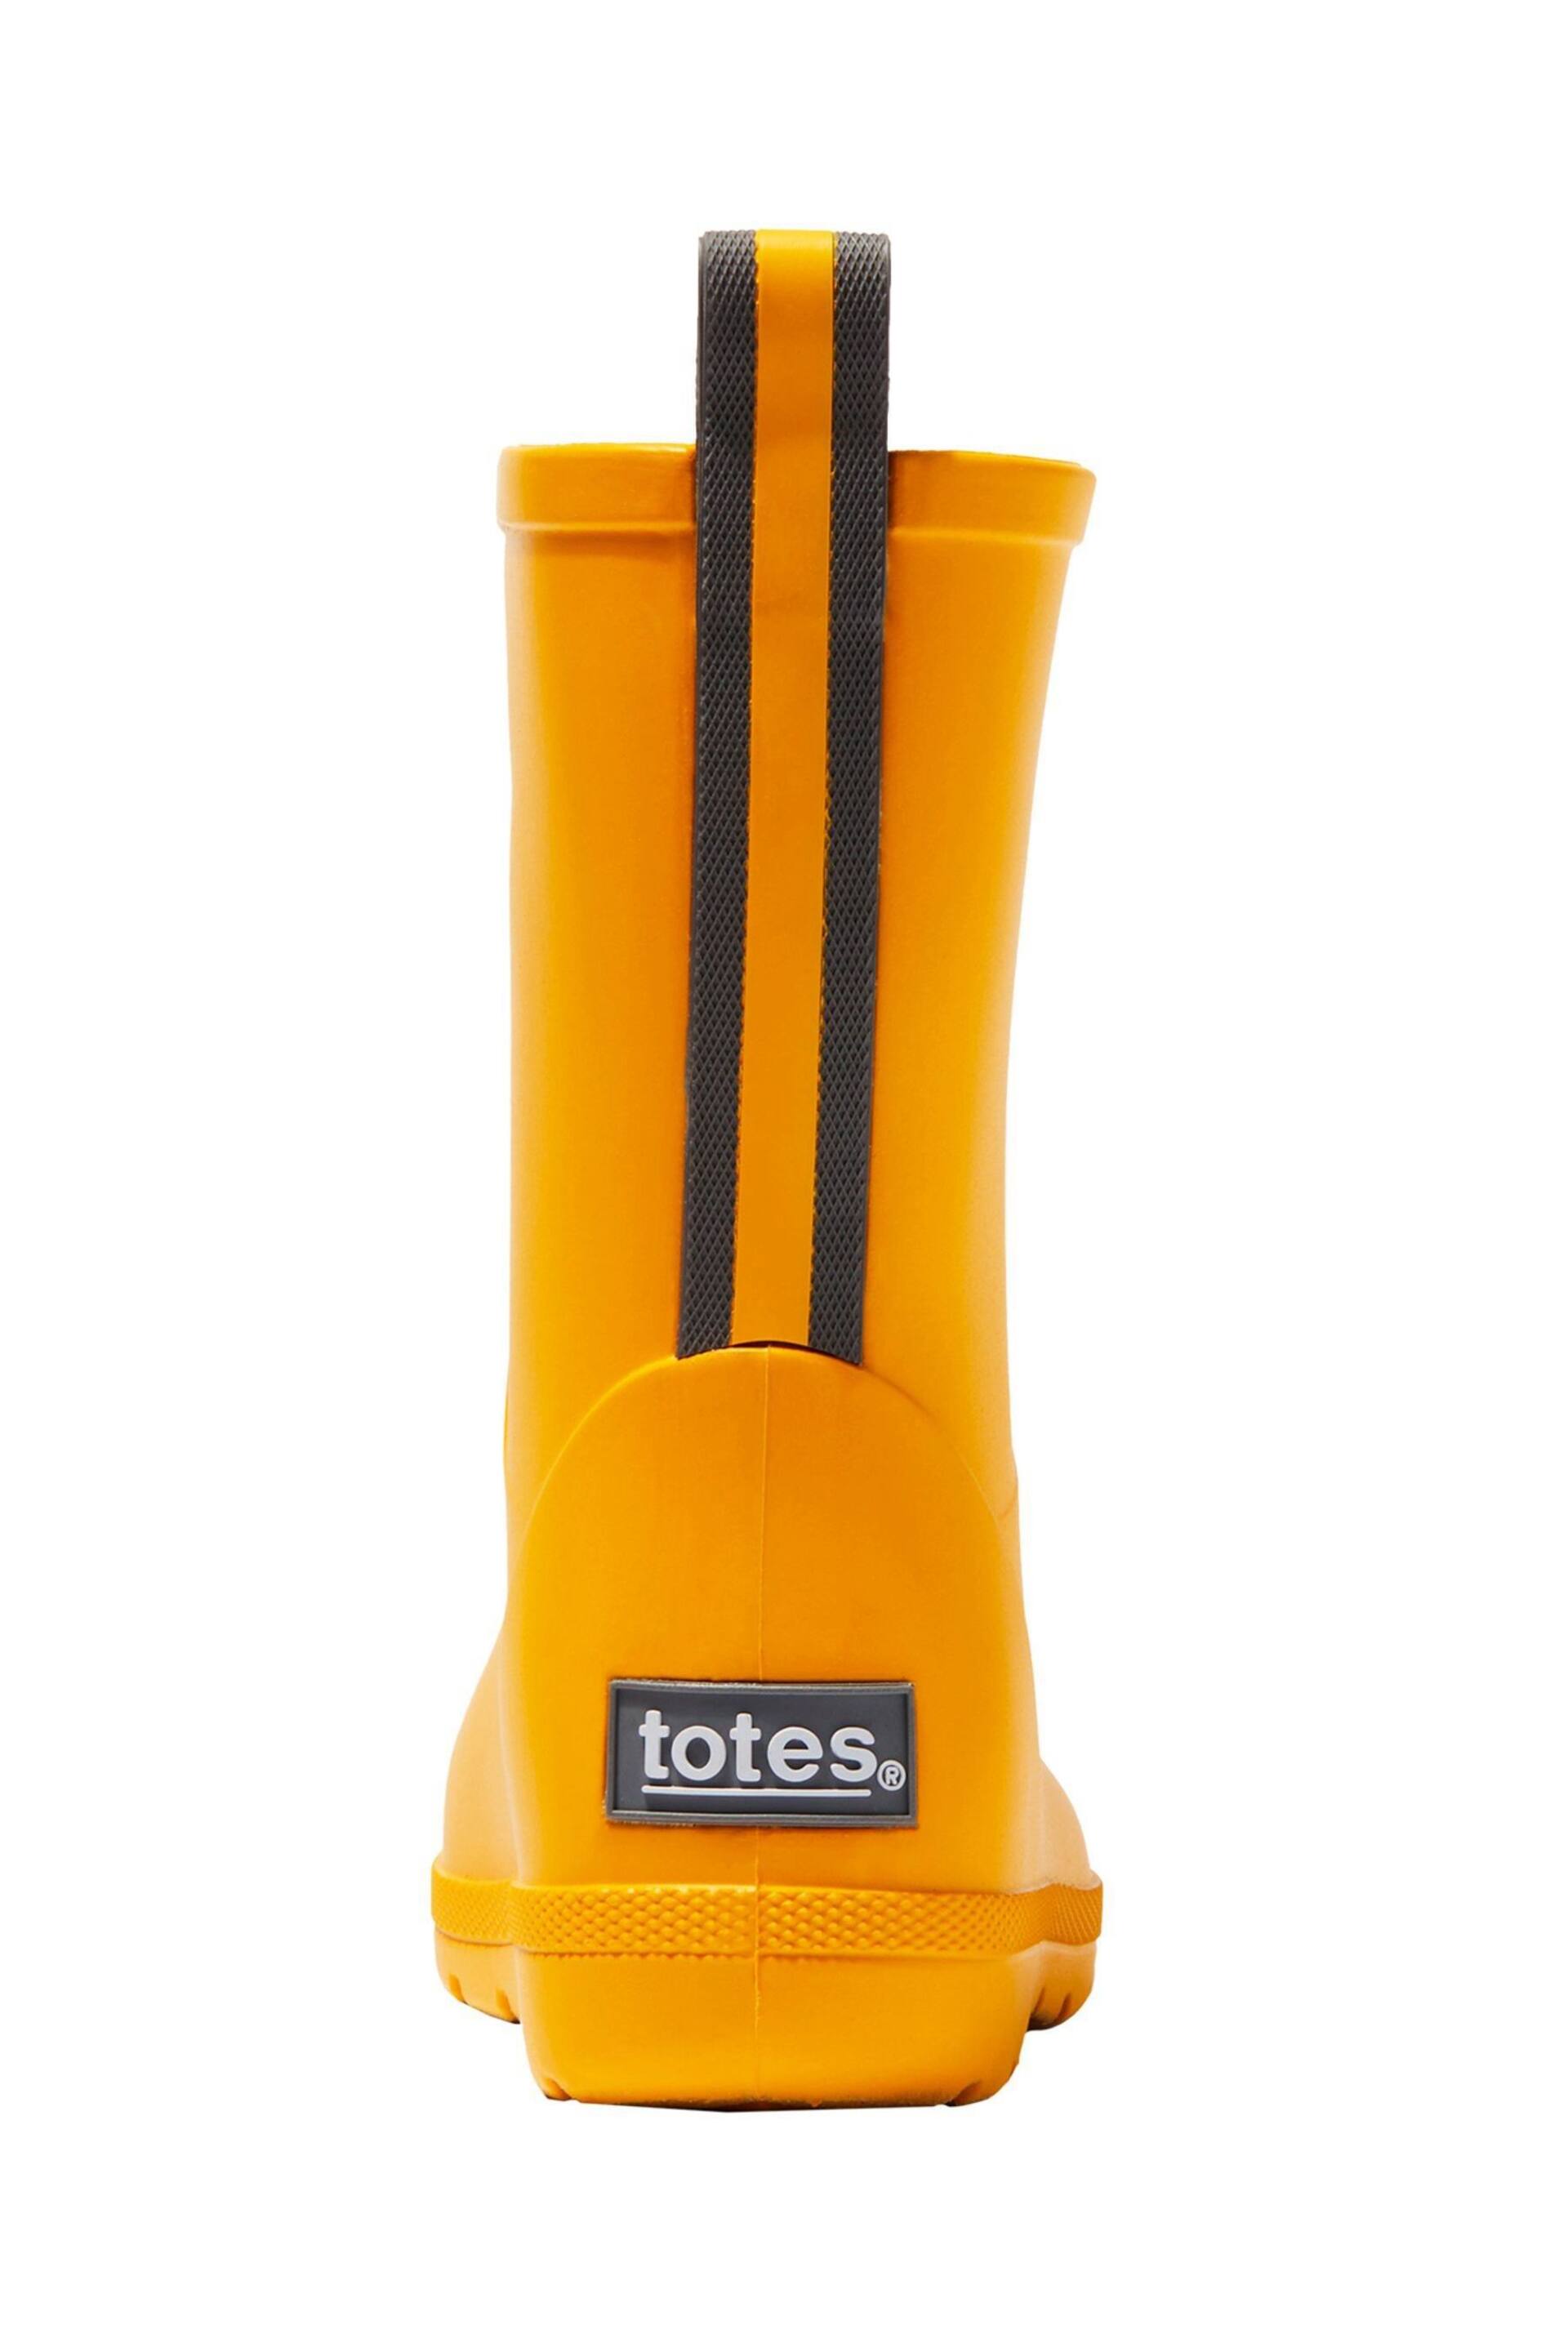 Totes Yellow Childrens Charley Welly Boots - Image 3 of 6